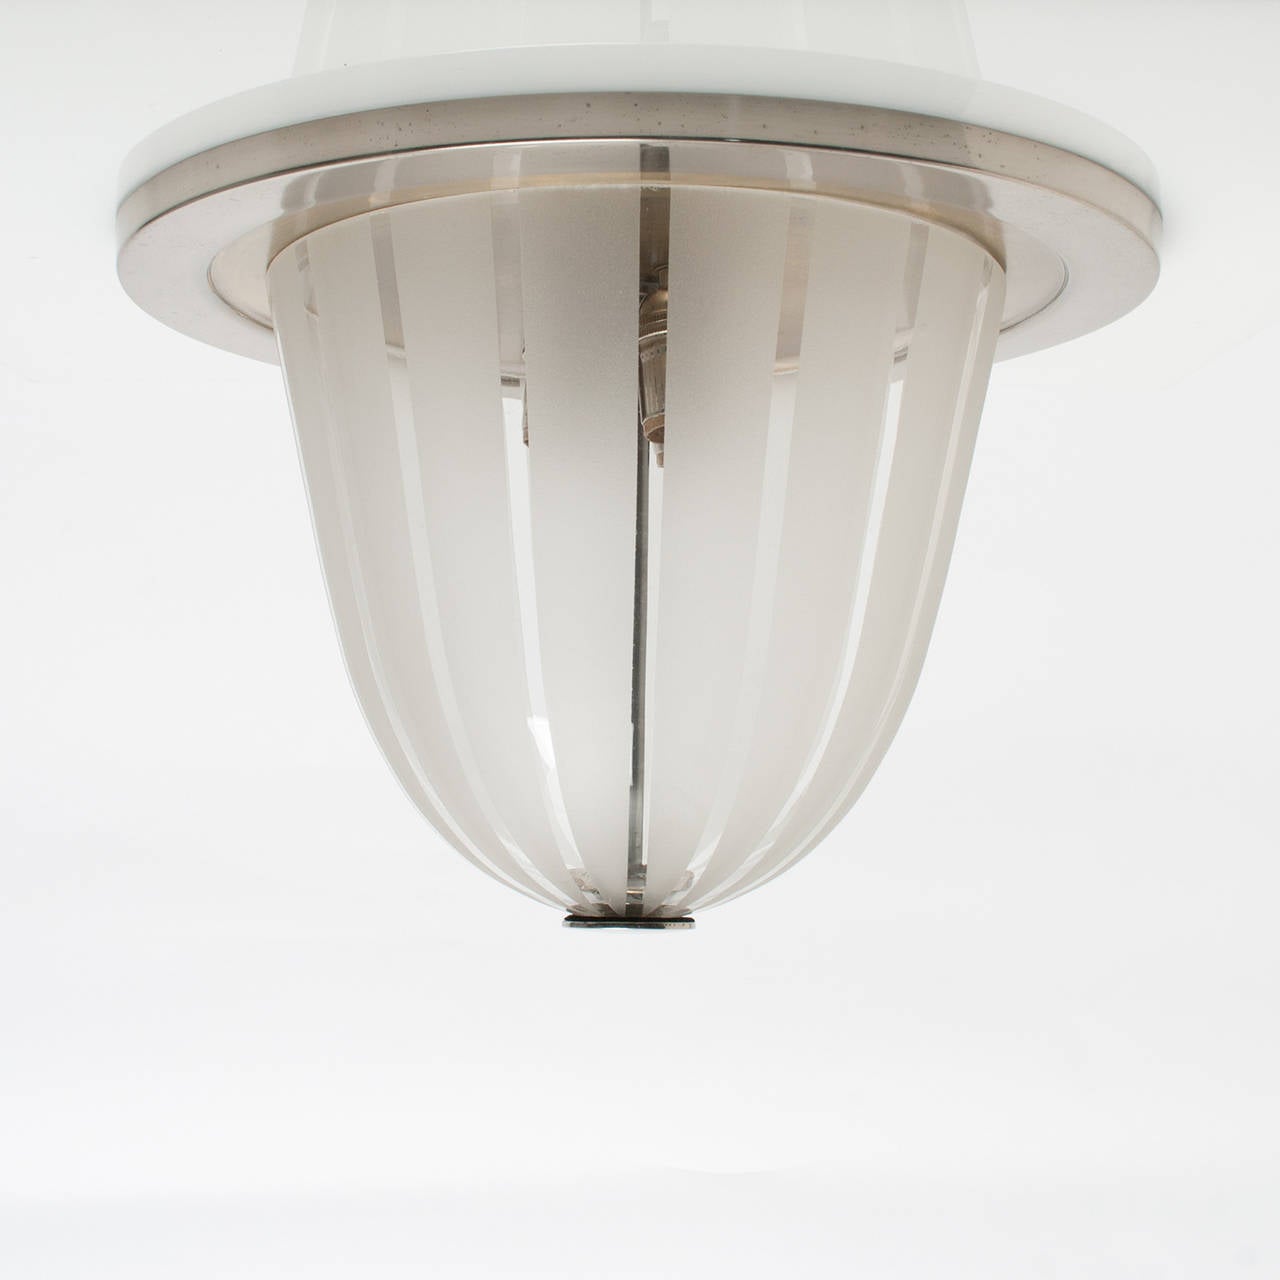 (2) Scandinavian Modern flush mount fixtures with clear and acid etched striped glass shades. Mounts and finials are nickel plated brass. Newly rewired with 3 standard bulb sockets each. Original finish, some tarnished spots. Probably made by